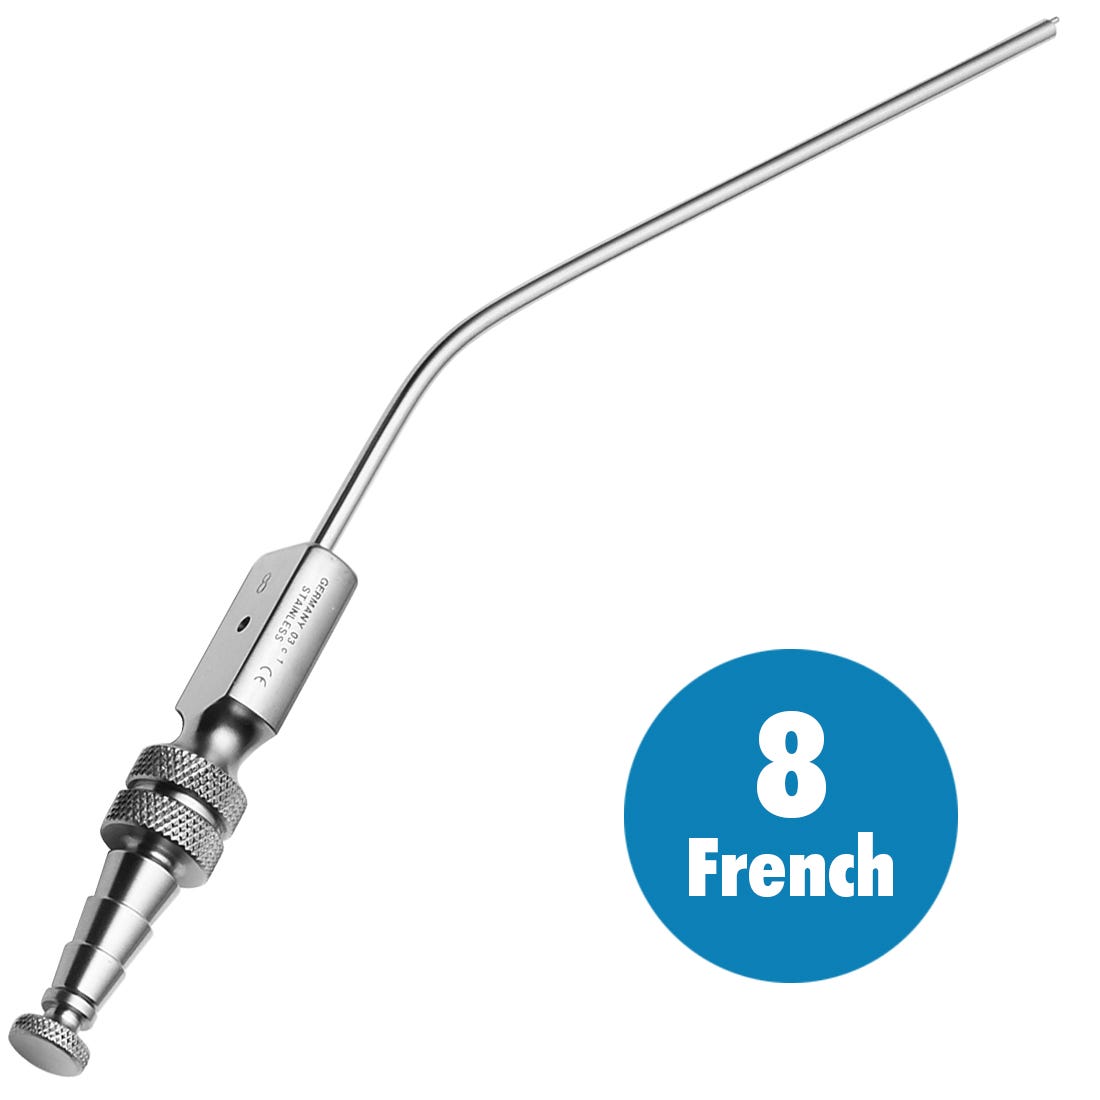 Frazier Suction Tip, 8 French, approx 2.67mm opening, 30 degree angle, delicate tip